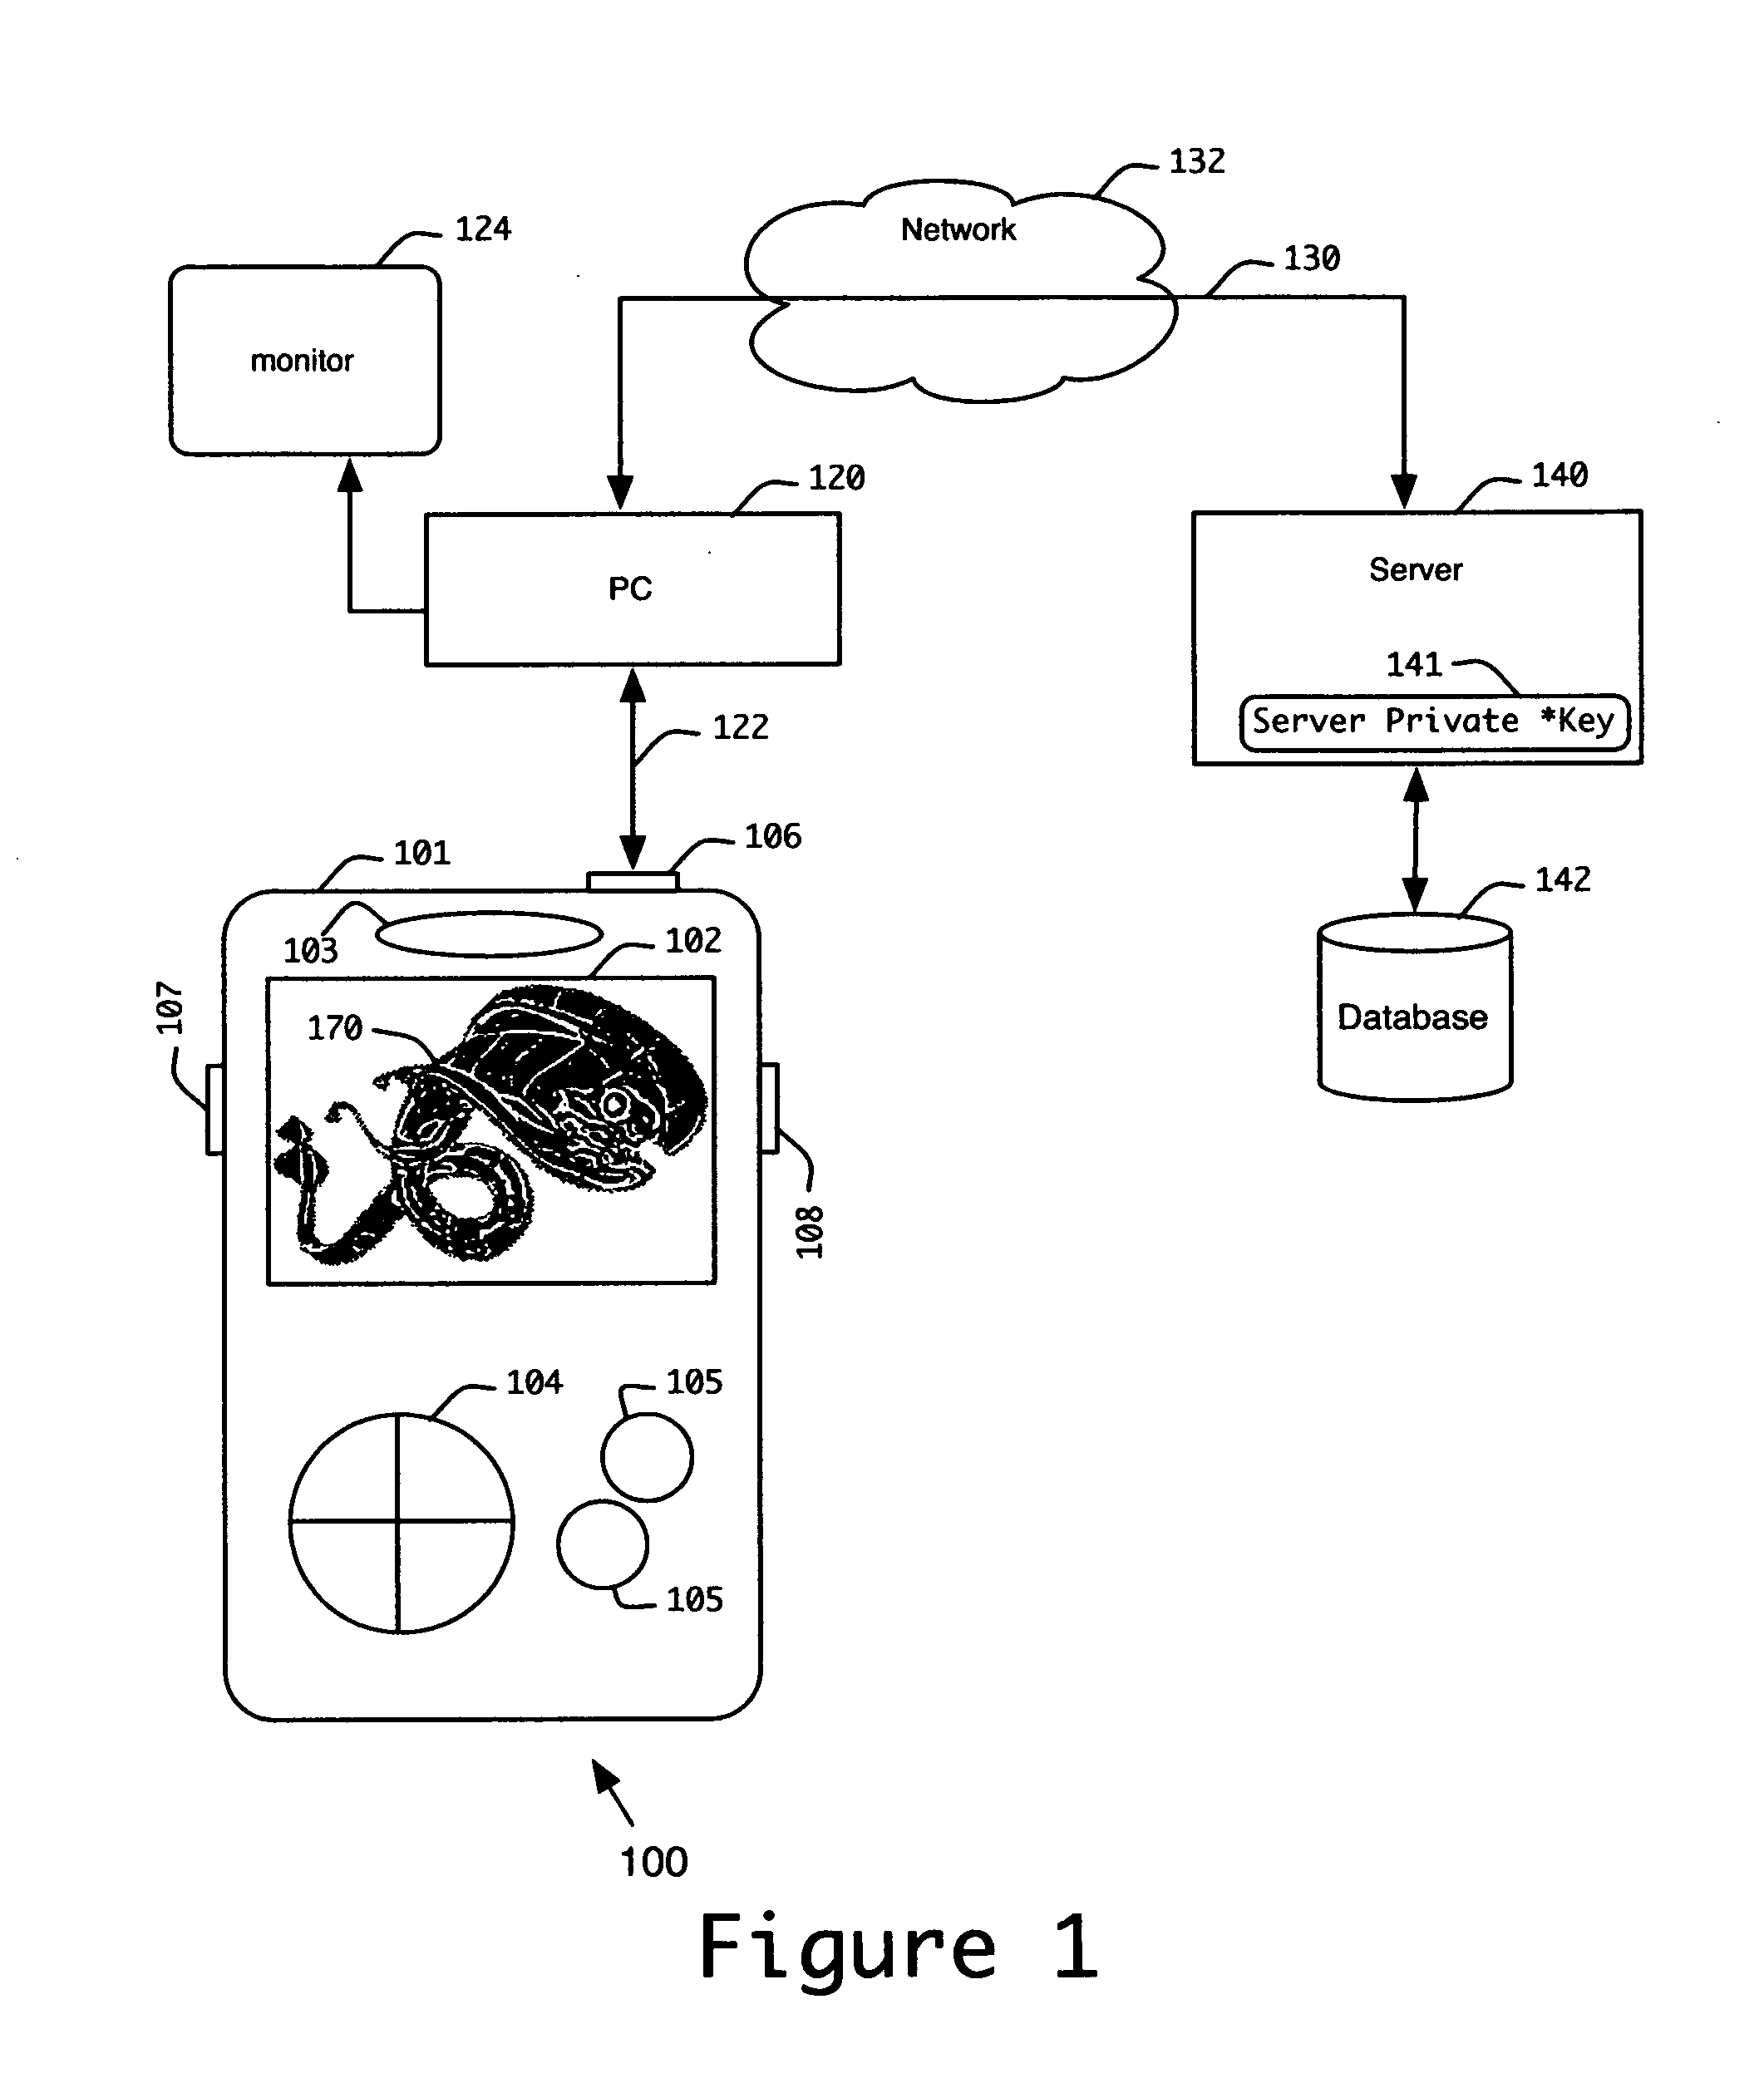 Multiplayer handheld computer game system having tiled display and method of use